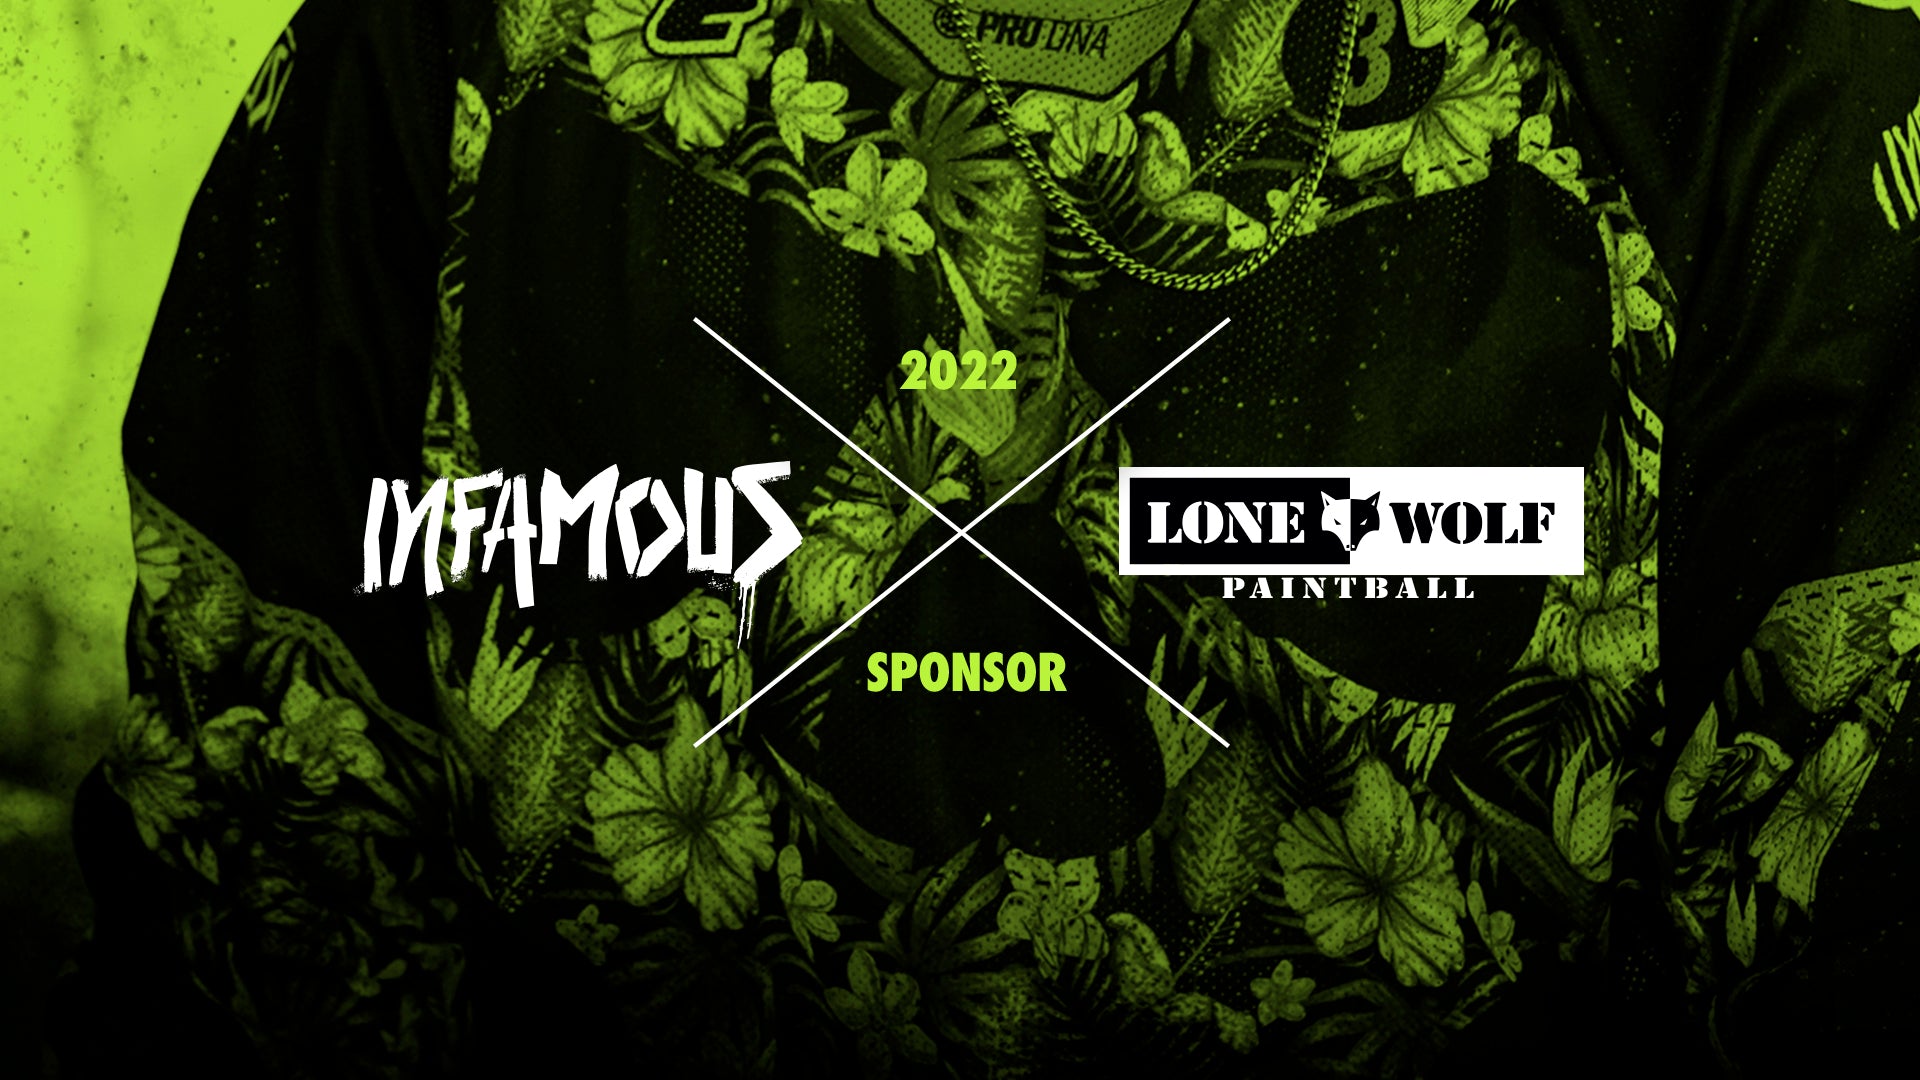 Lone Wolf Paintball - Infamous Sponsor 2022